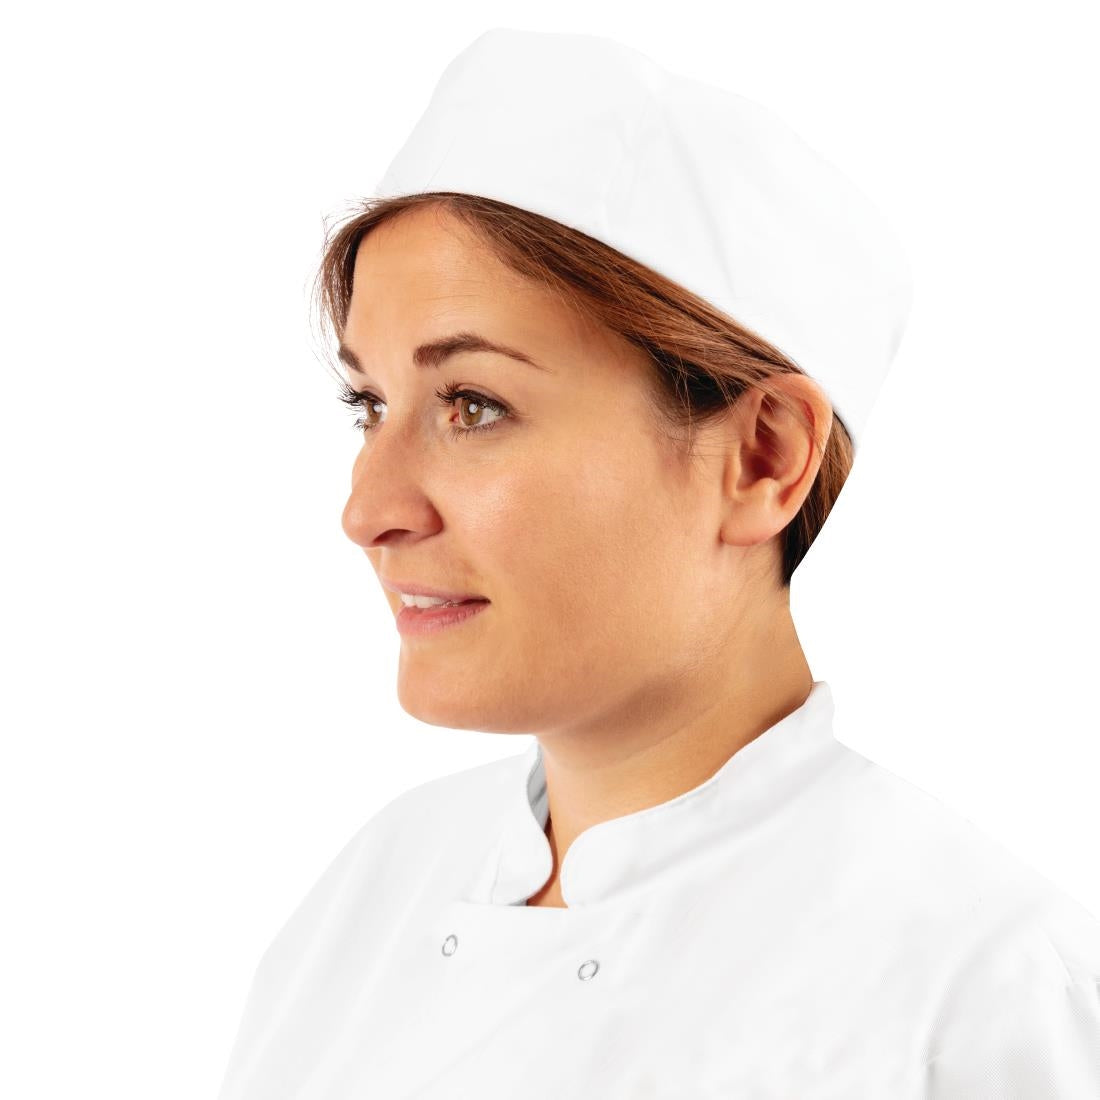 A203-S Whites Chefs Unisex Skull Cap Polycotton White - S JD Catering Equipment Solutions Ltd